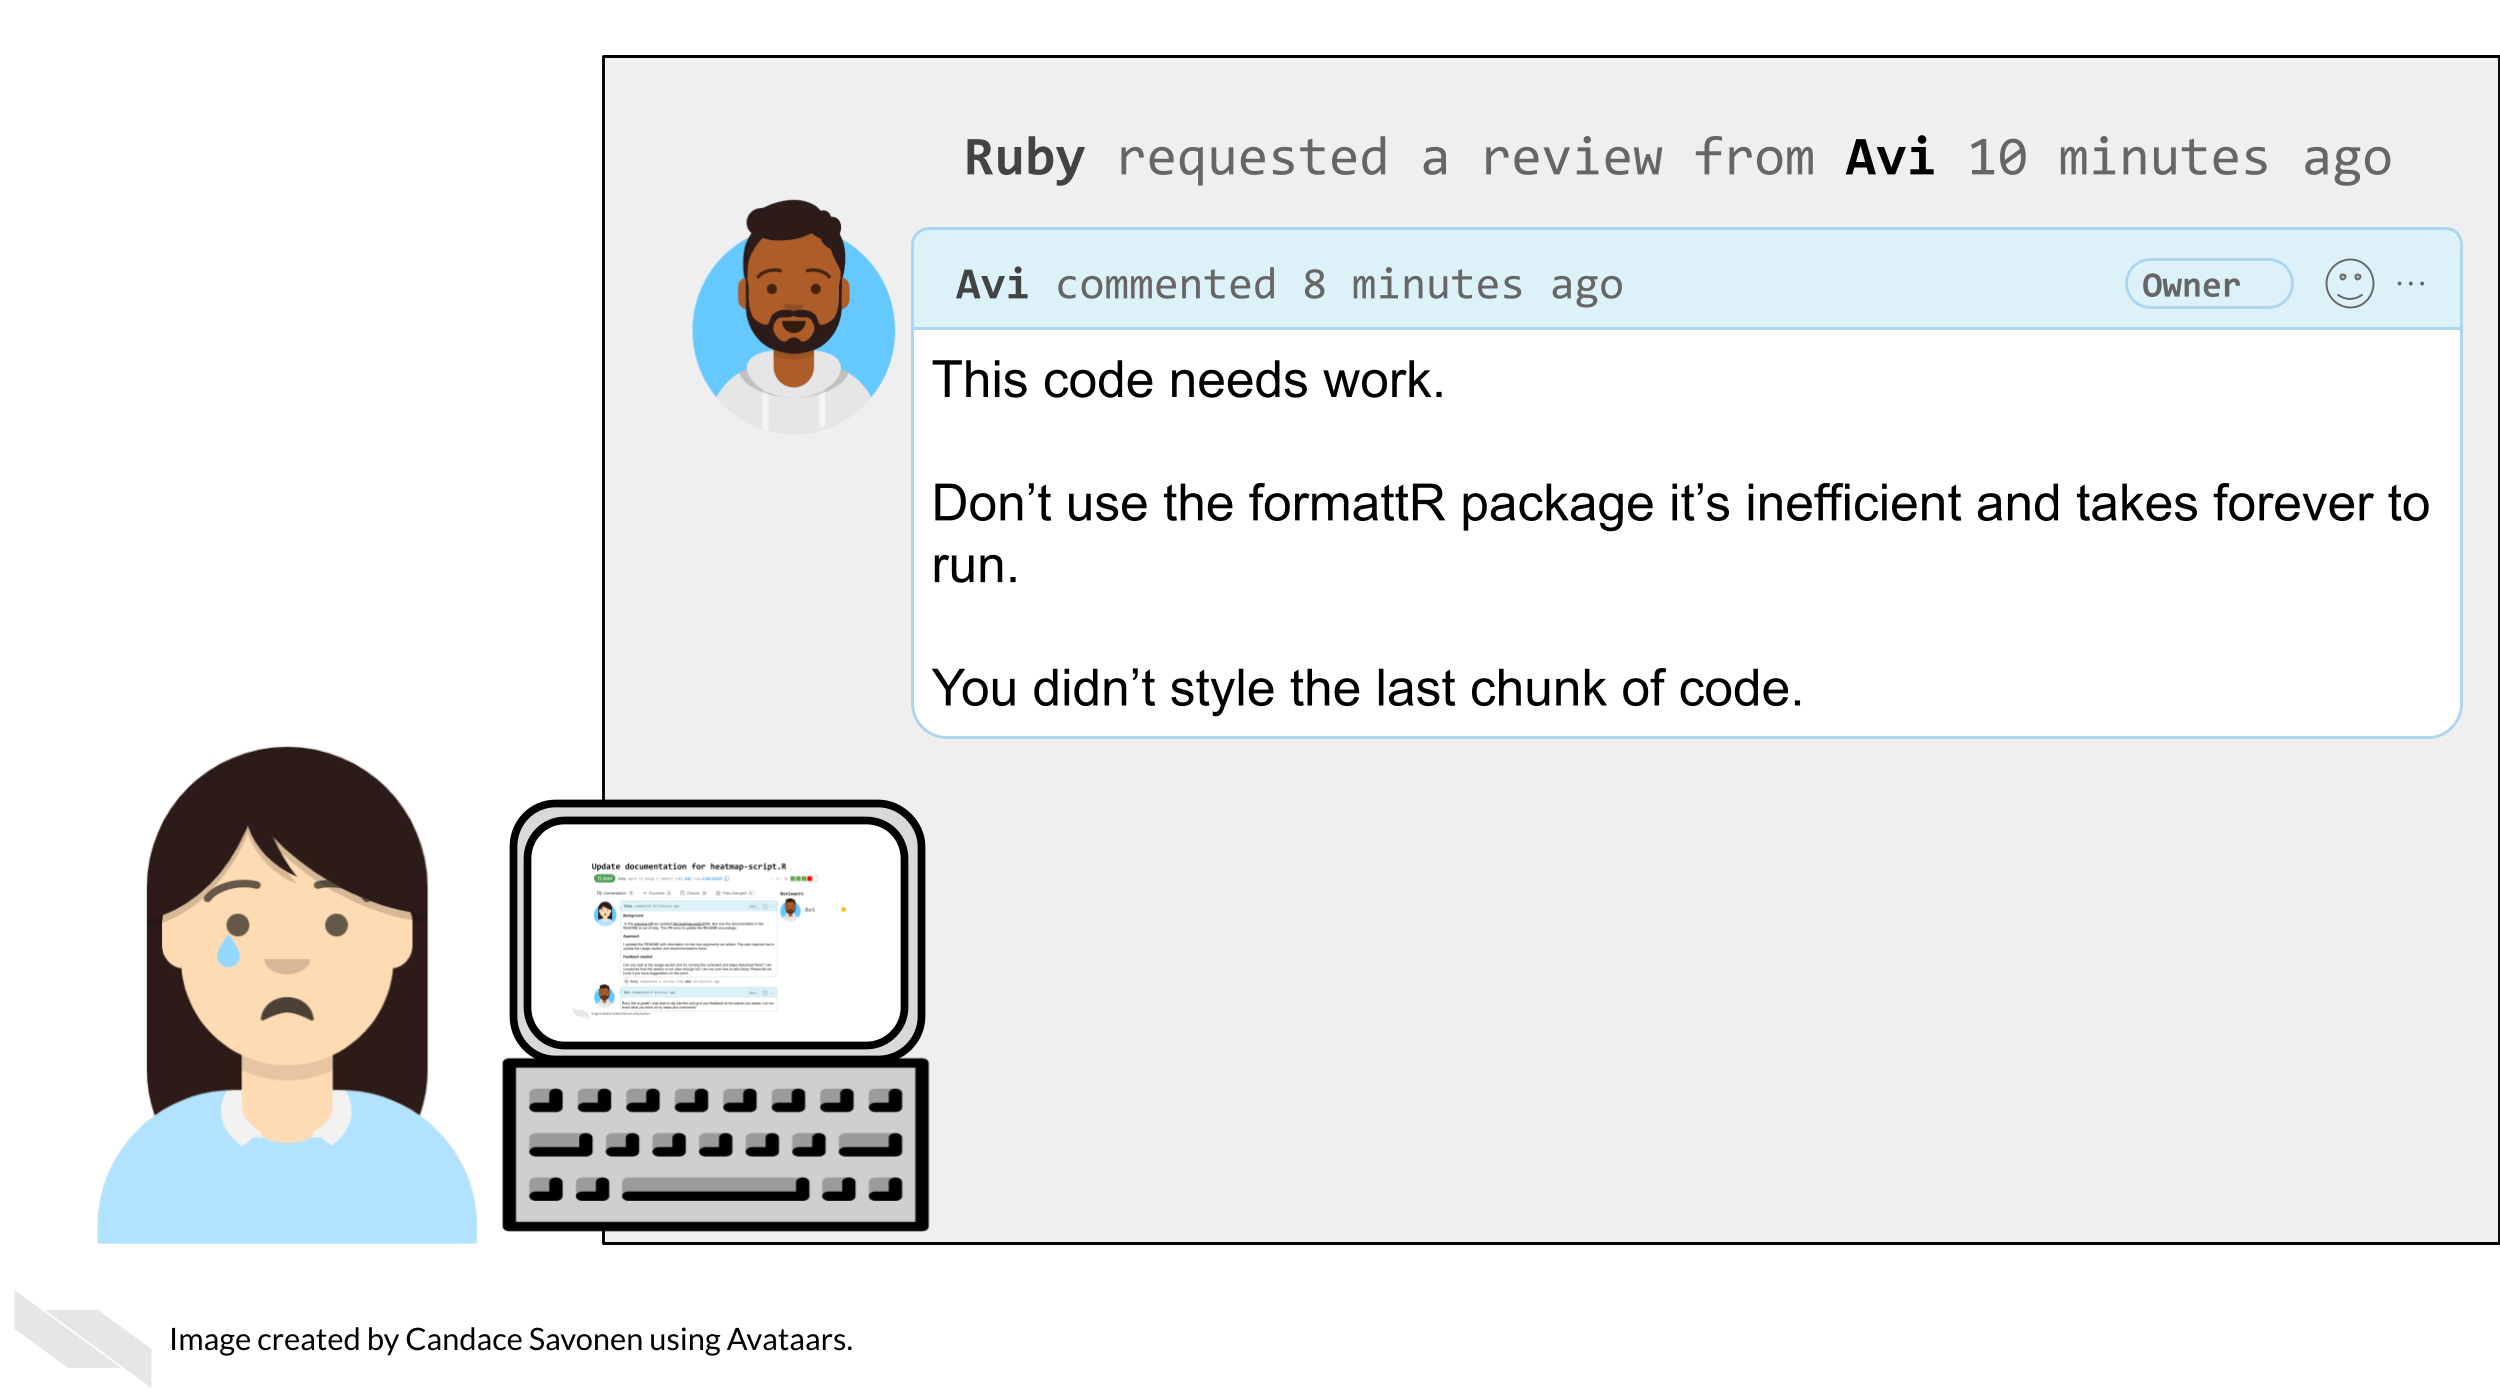 Ruby requested a code review from Avi who has responded: This code needs work. Don’t use the formattR package it’s inefficient and takes forever to run. You didn’t style the last chunk of code. This feels very harsh to Ruby who has a single tear.